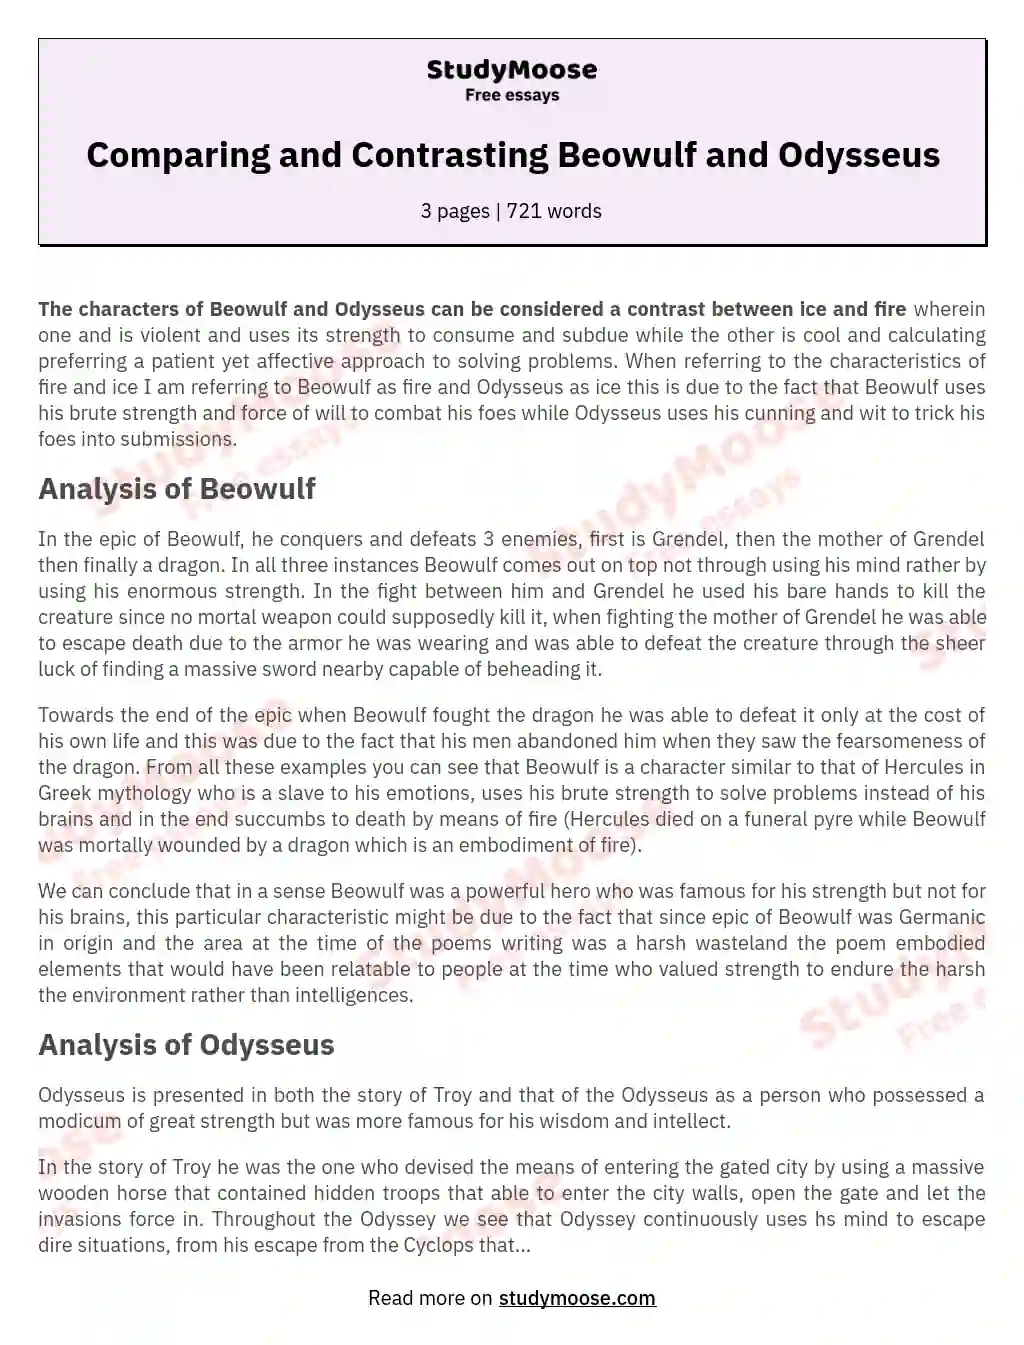 Comparing and Contrasting Beowulf and Odysseus essay